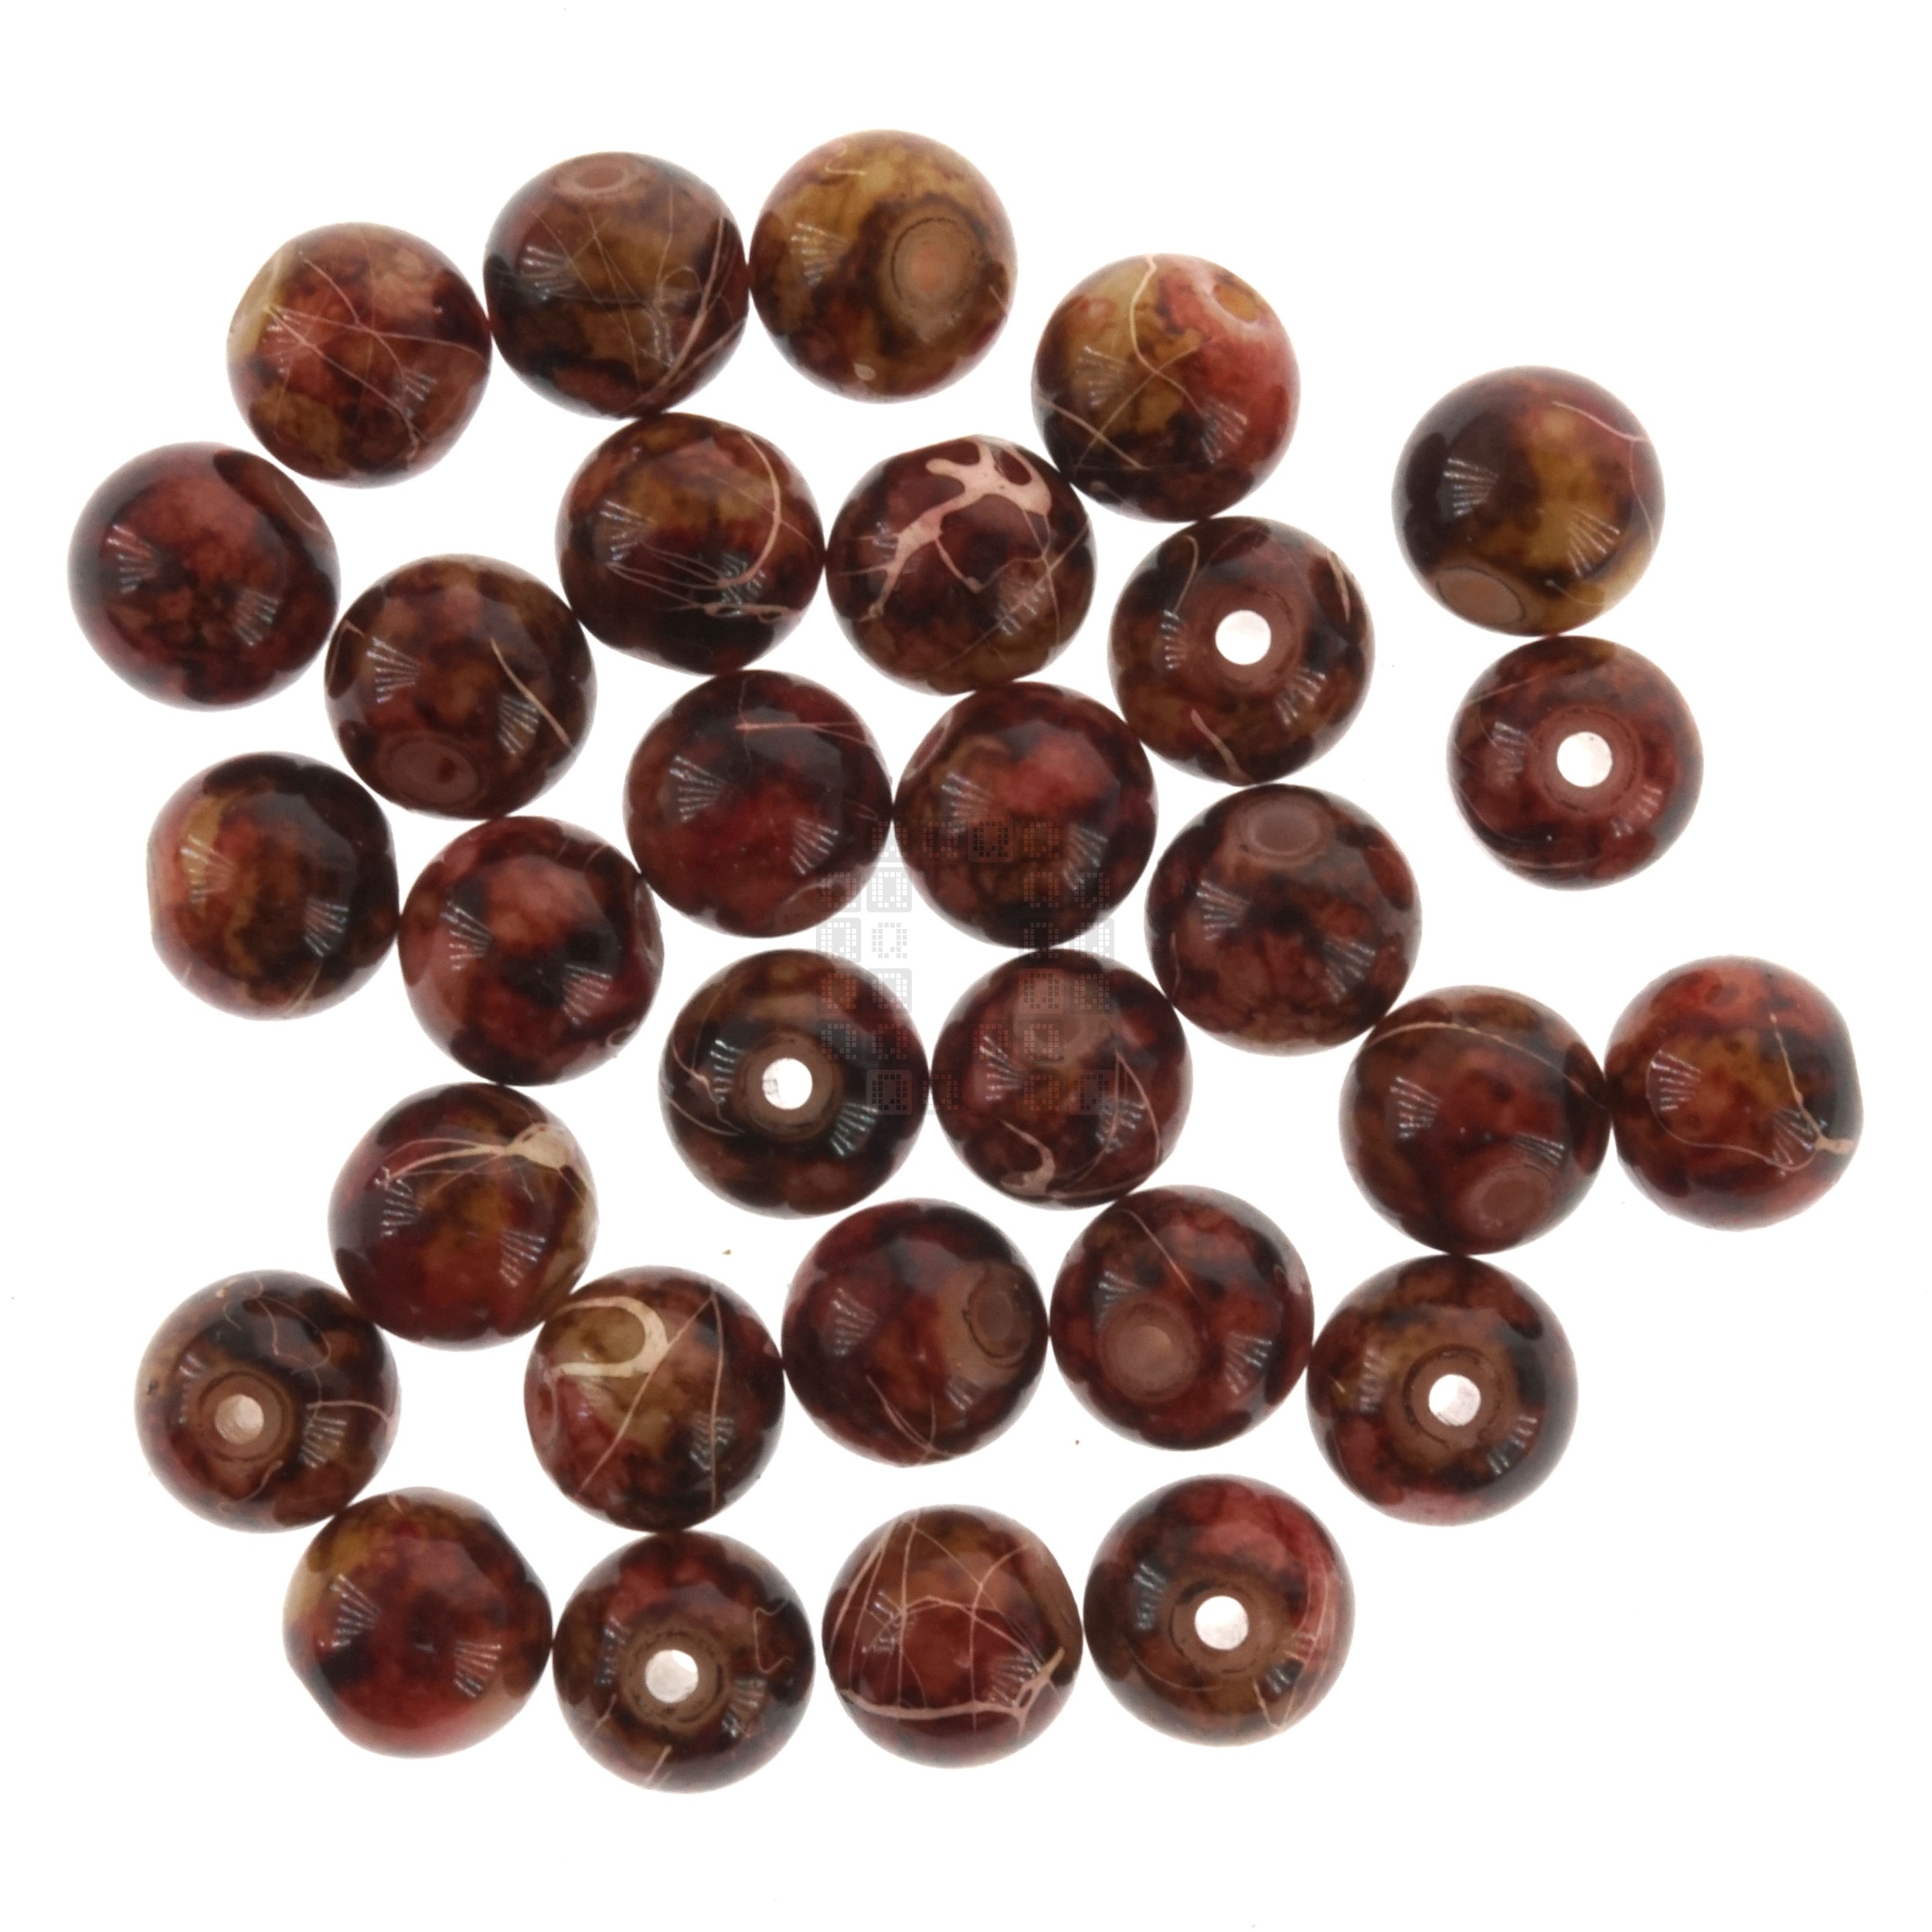 Golden Chestnut 8mm Loose Glass Beads, 30 Pieces